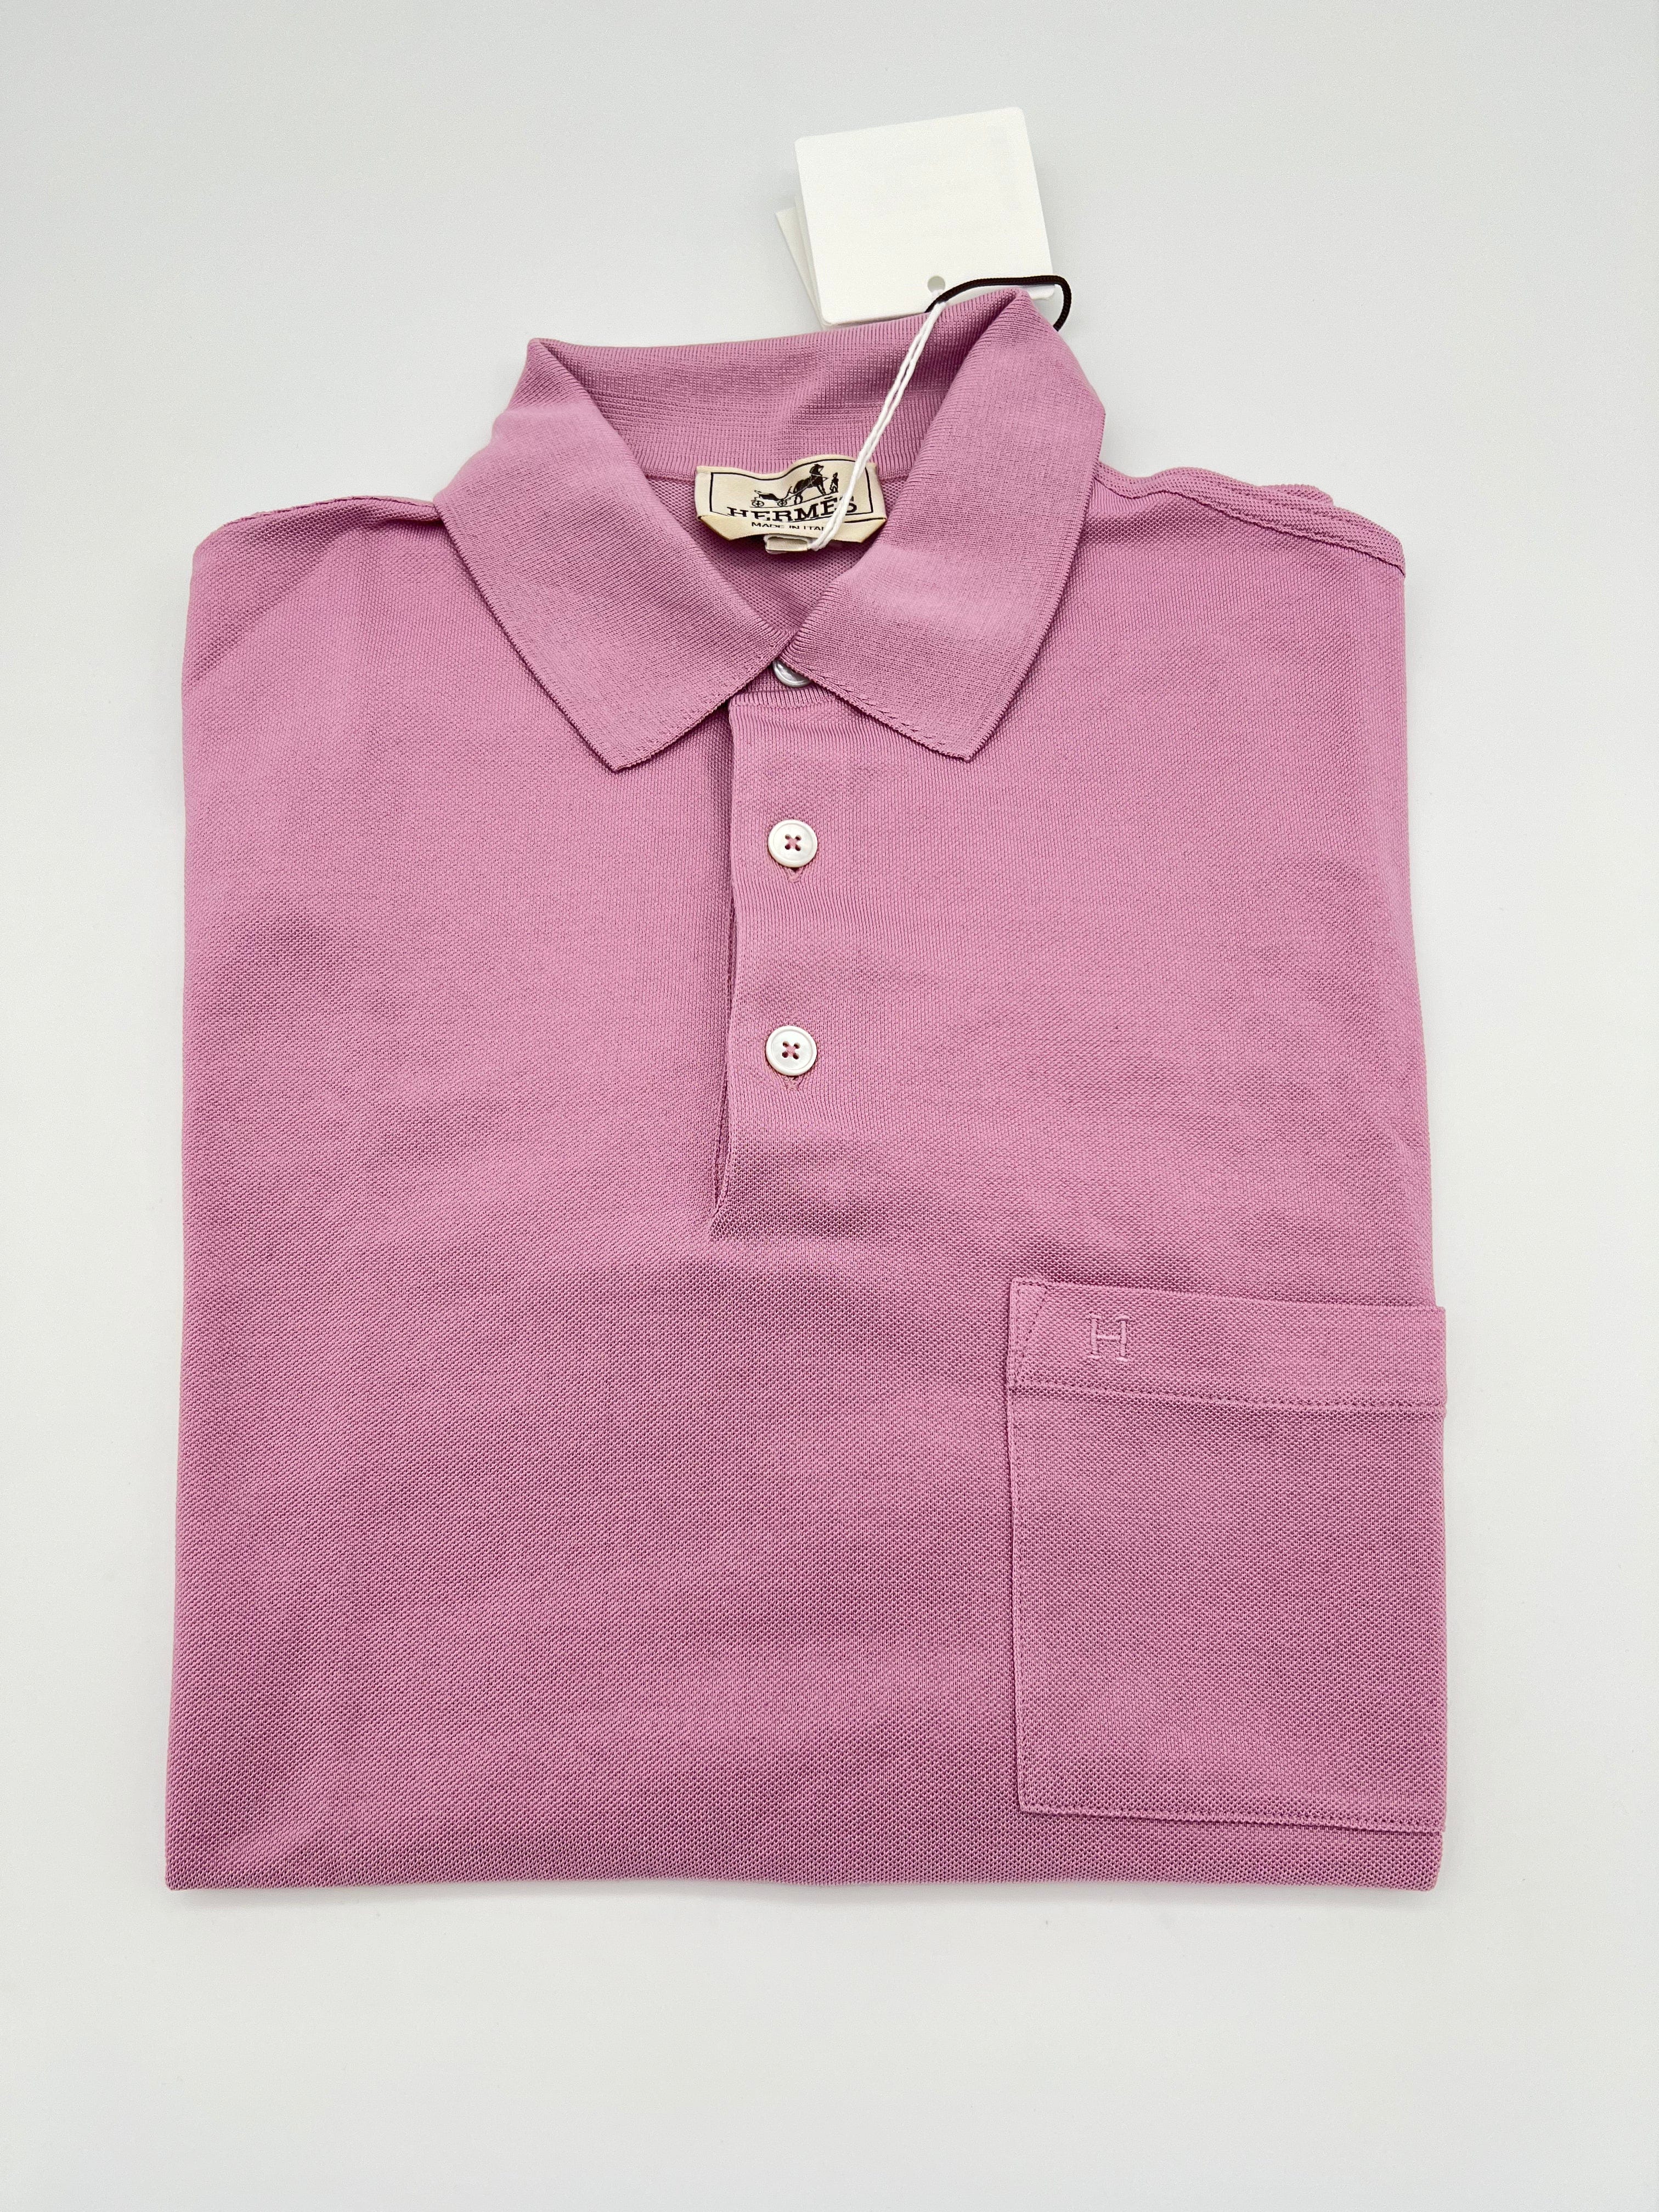 Hermès Hermes H Embroidered Polo Shirt in Rose Clair Size Large UIC1006